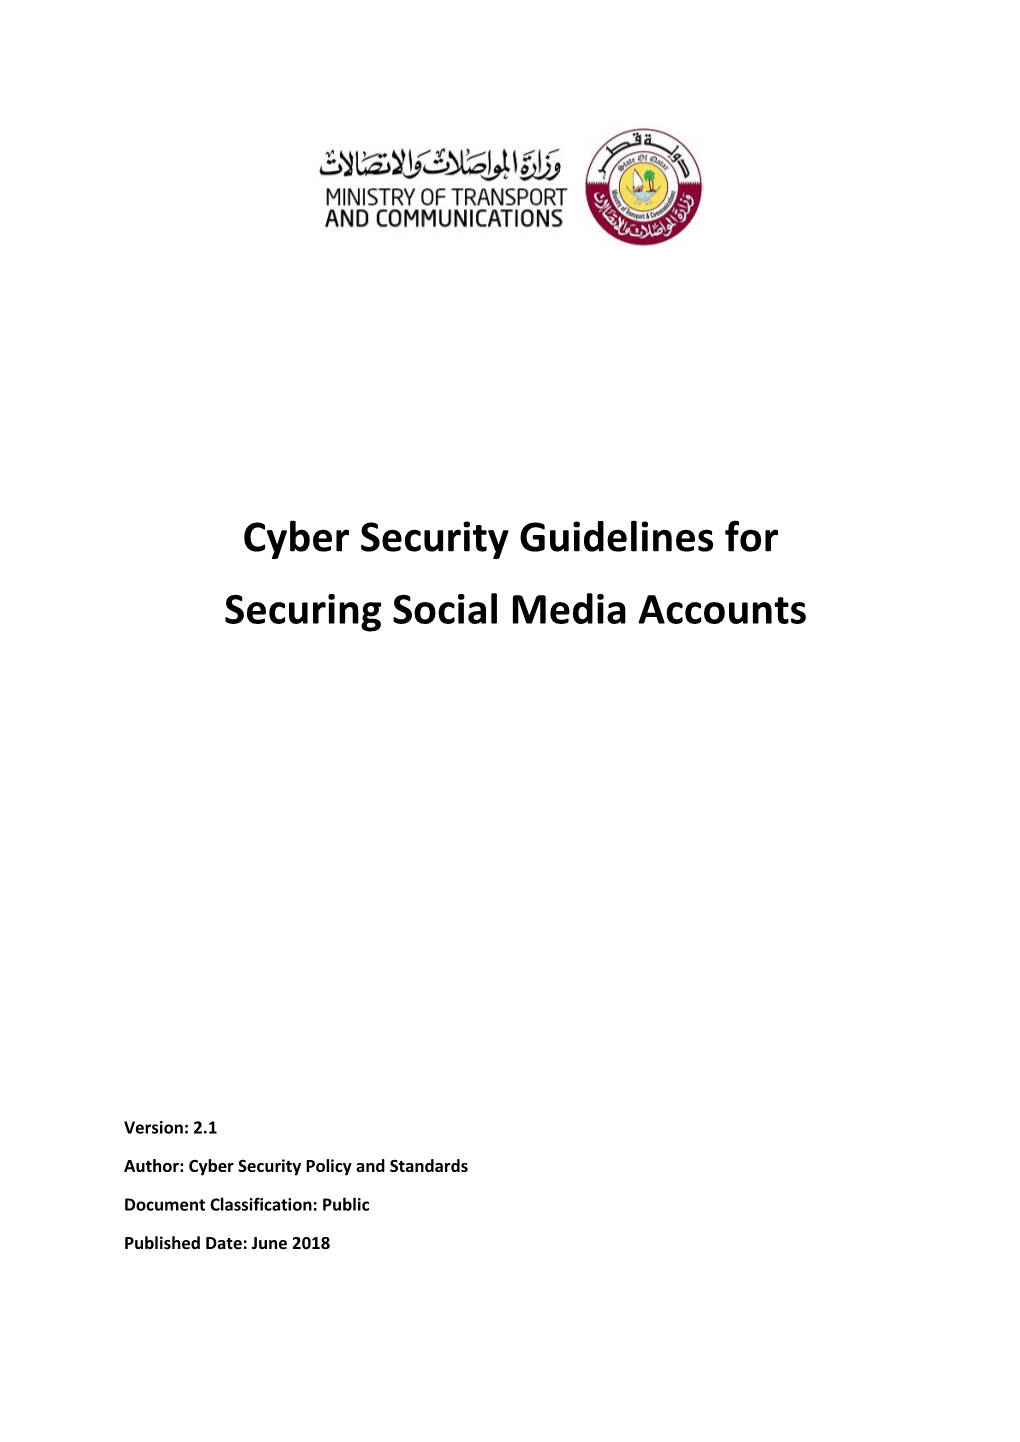 Cyber Security Guidelines for Securing Social Media Accounts